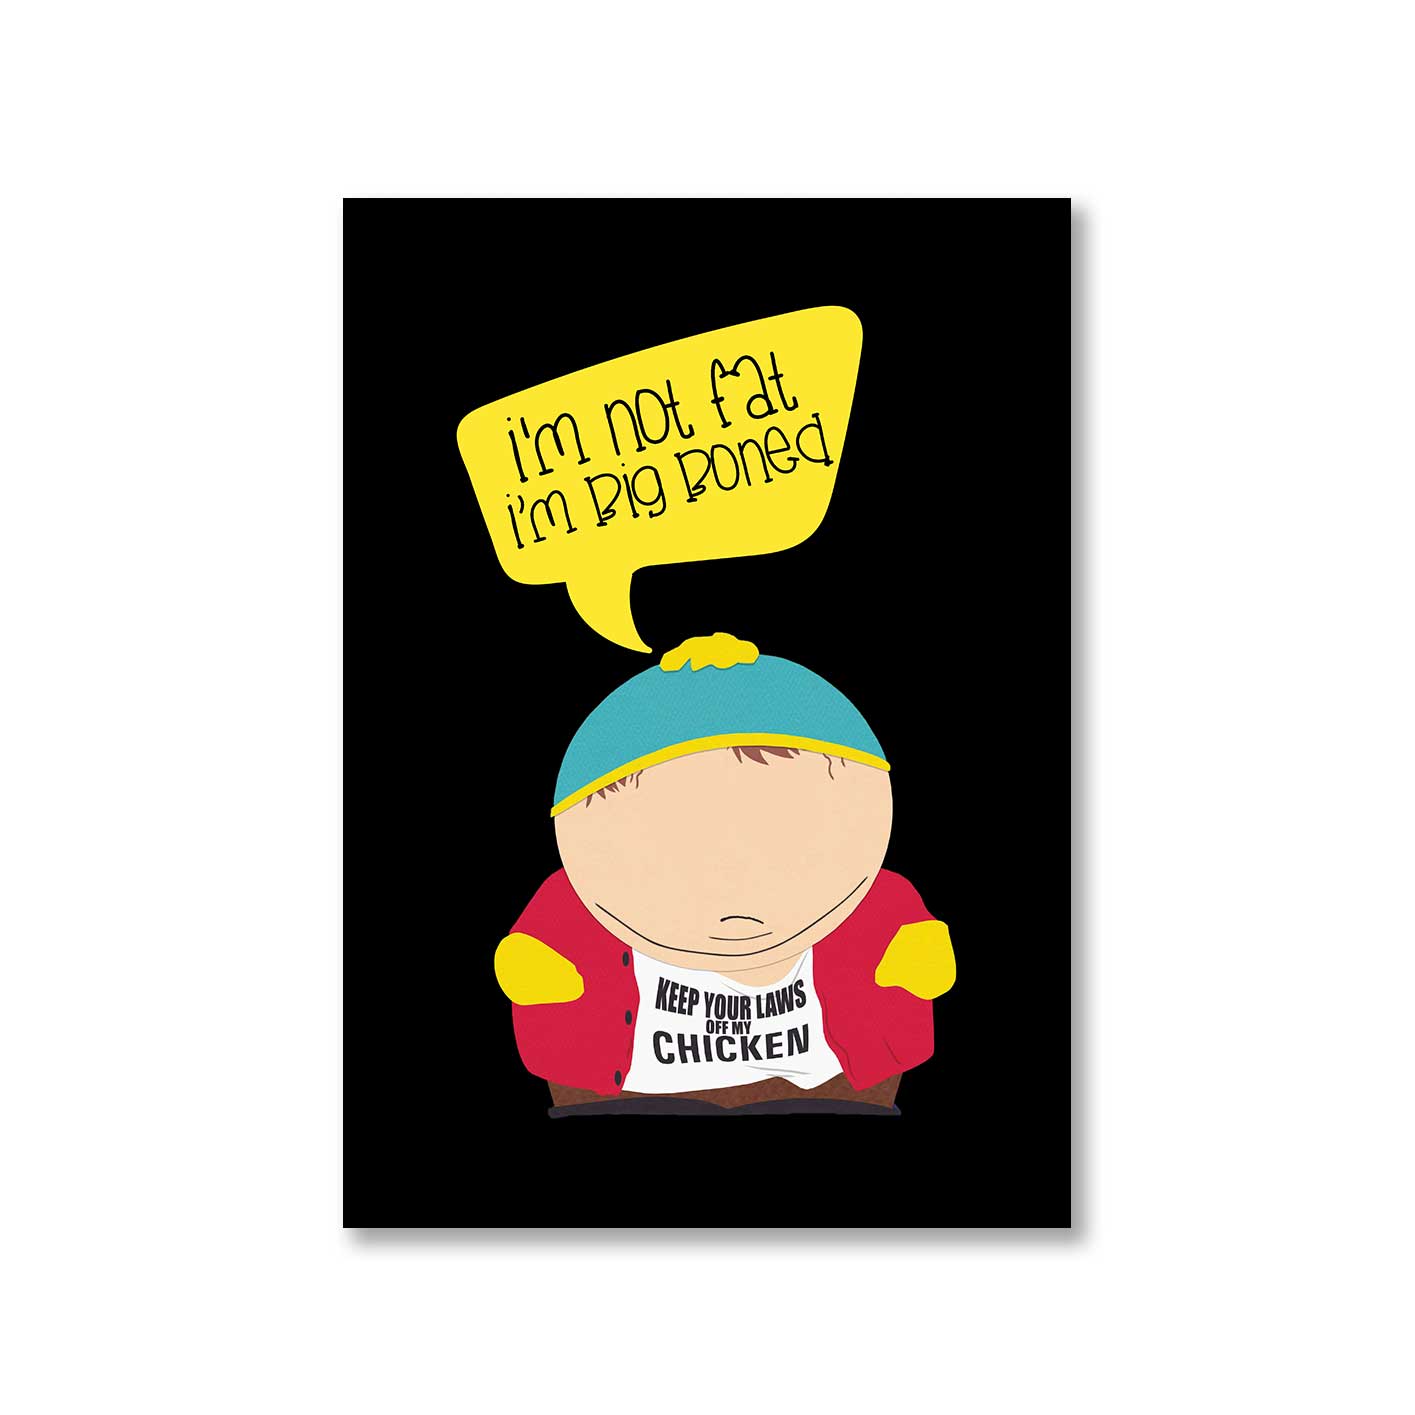 south park big boned poster wall art buy online united states of america usa the banyan tee tbt a4 south park kenny cartman stan kyle cartoon character illustration